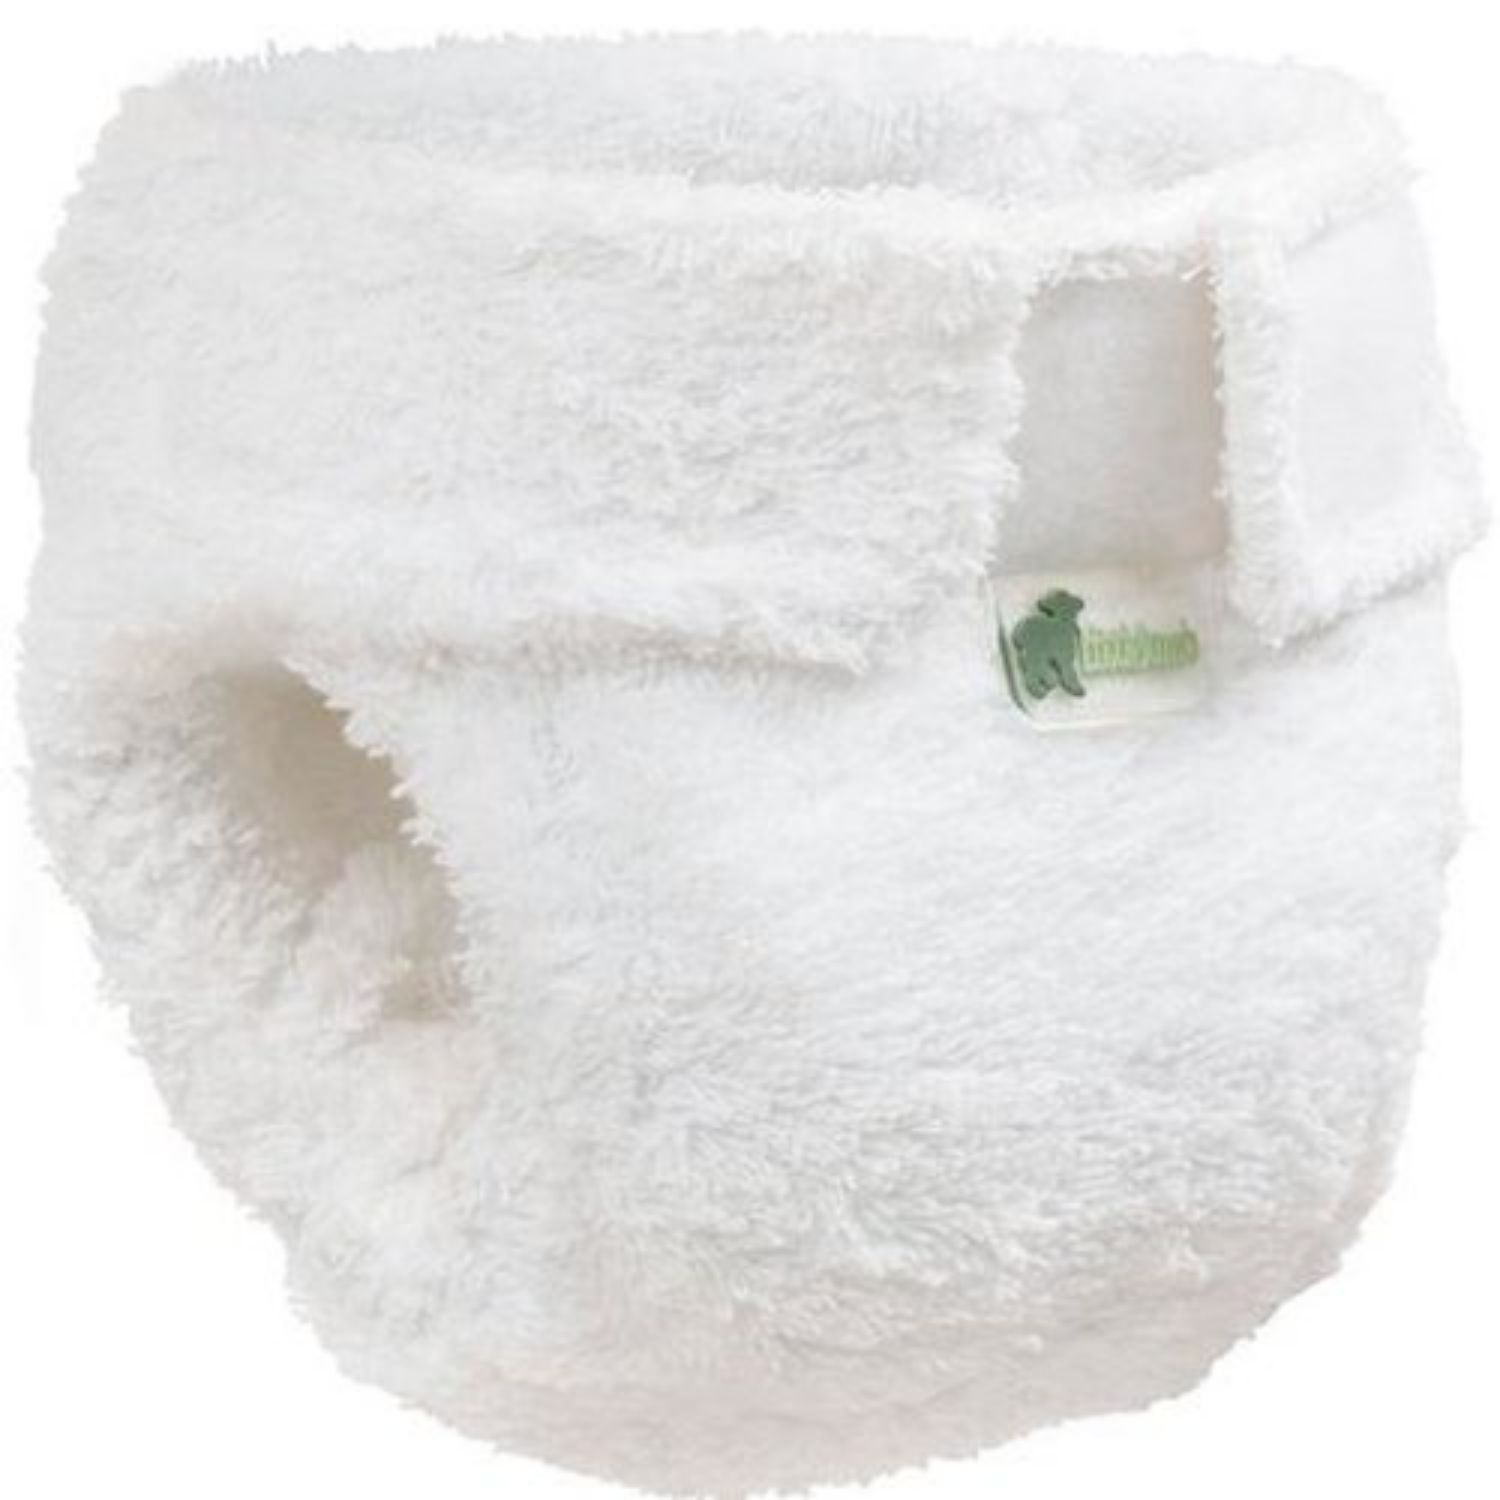 Little Lamb fitted nappy (cotton)